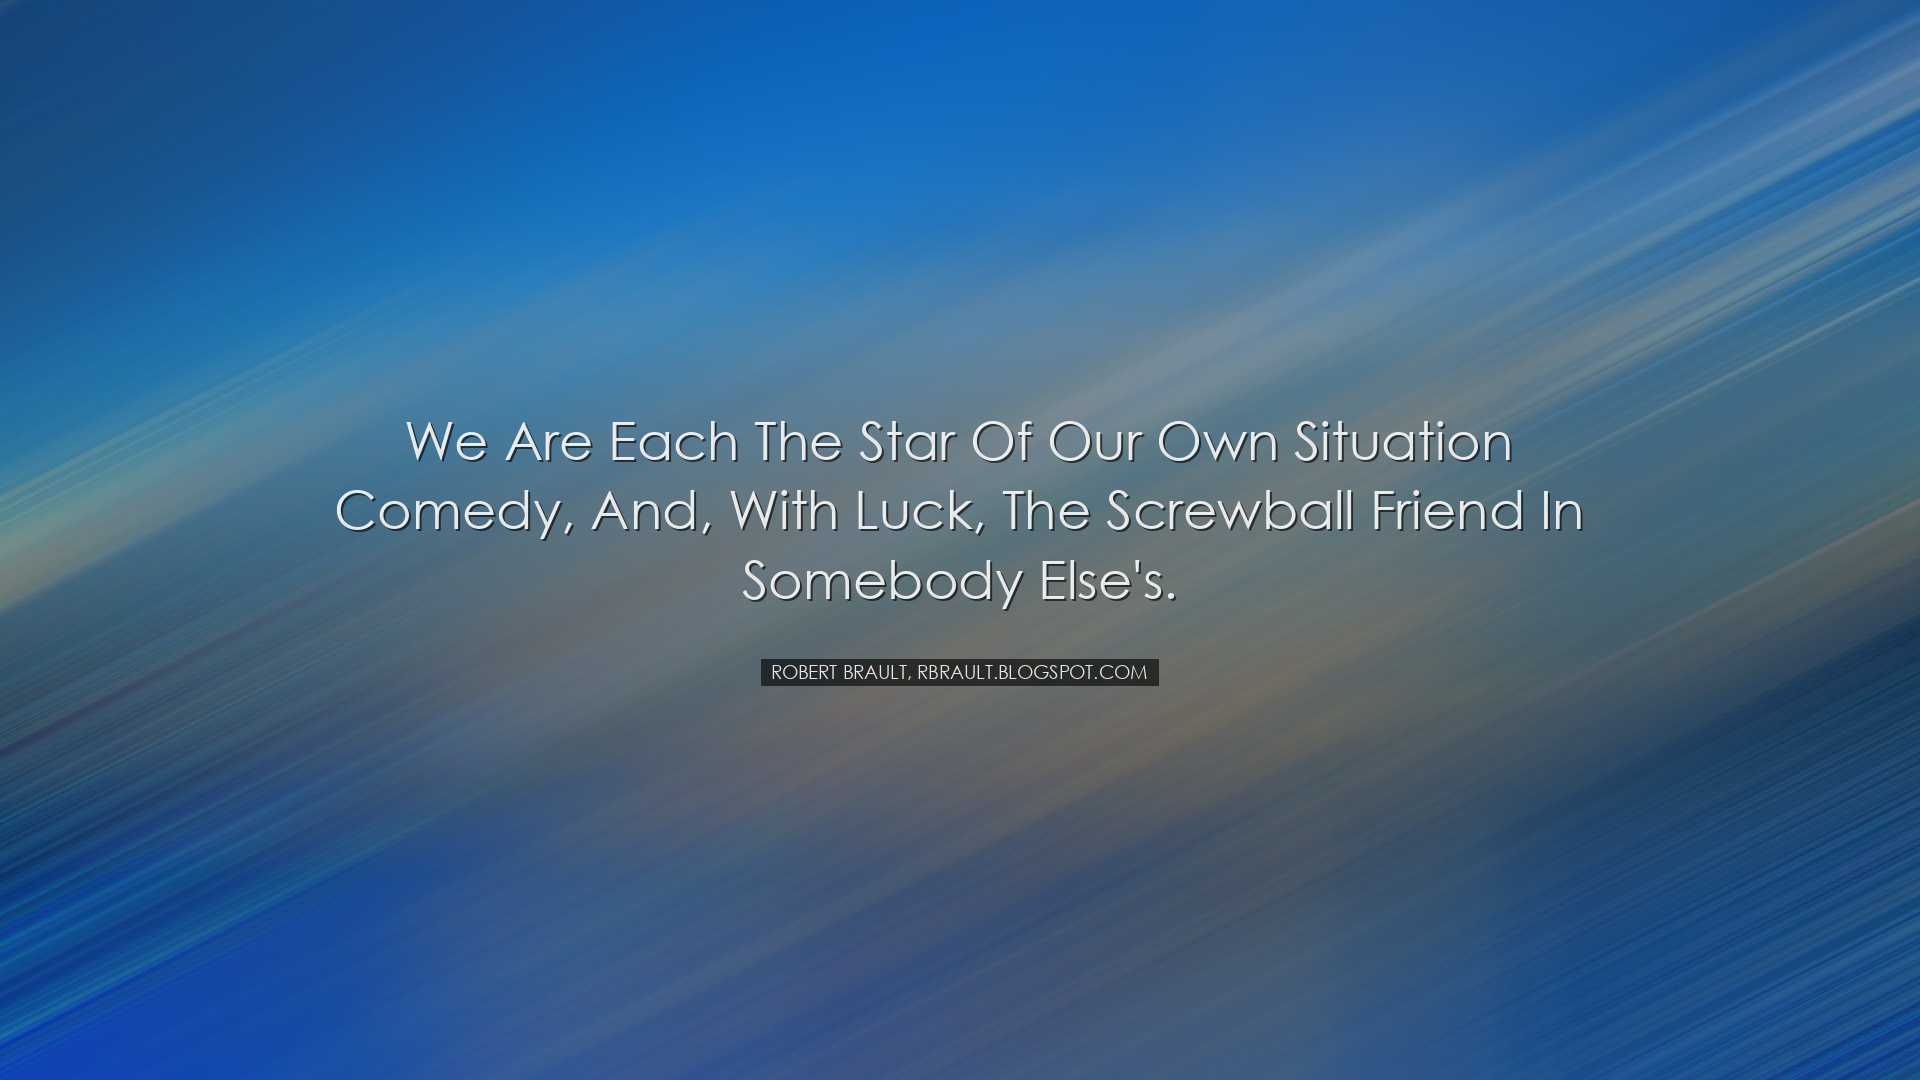 We are each the star of our own situation comedy, and, with luck,